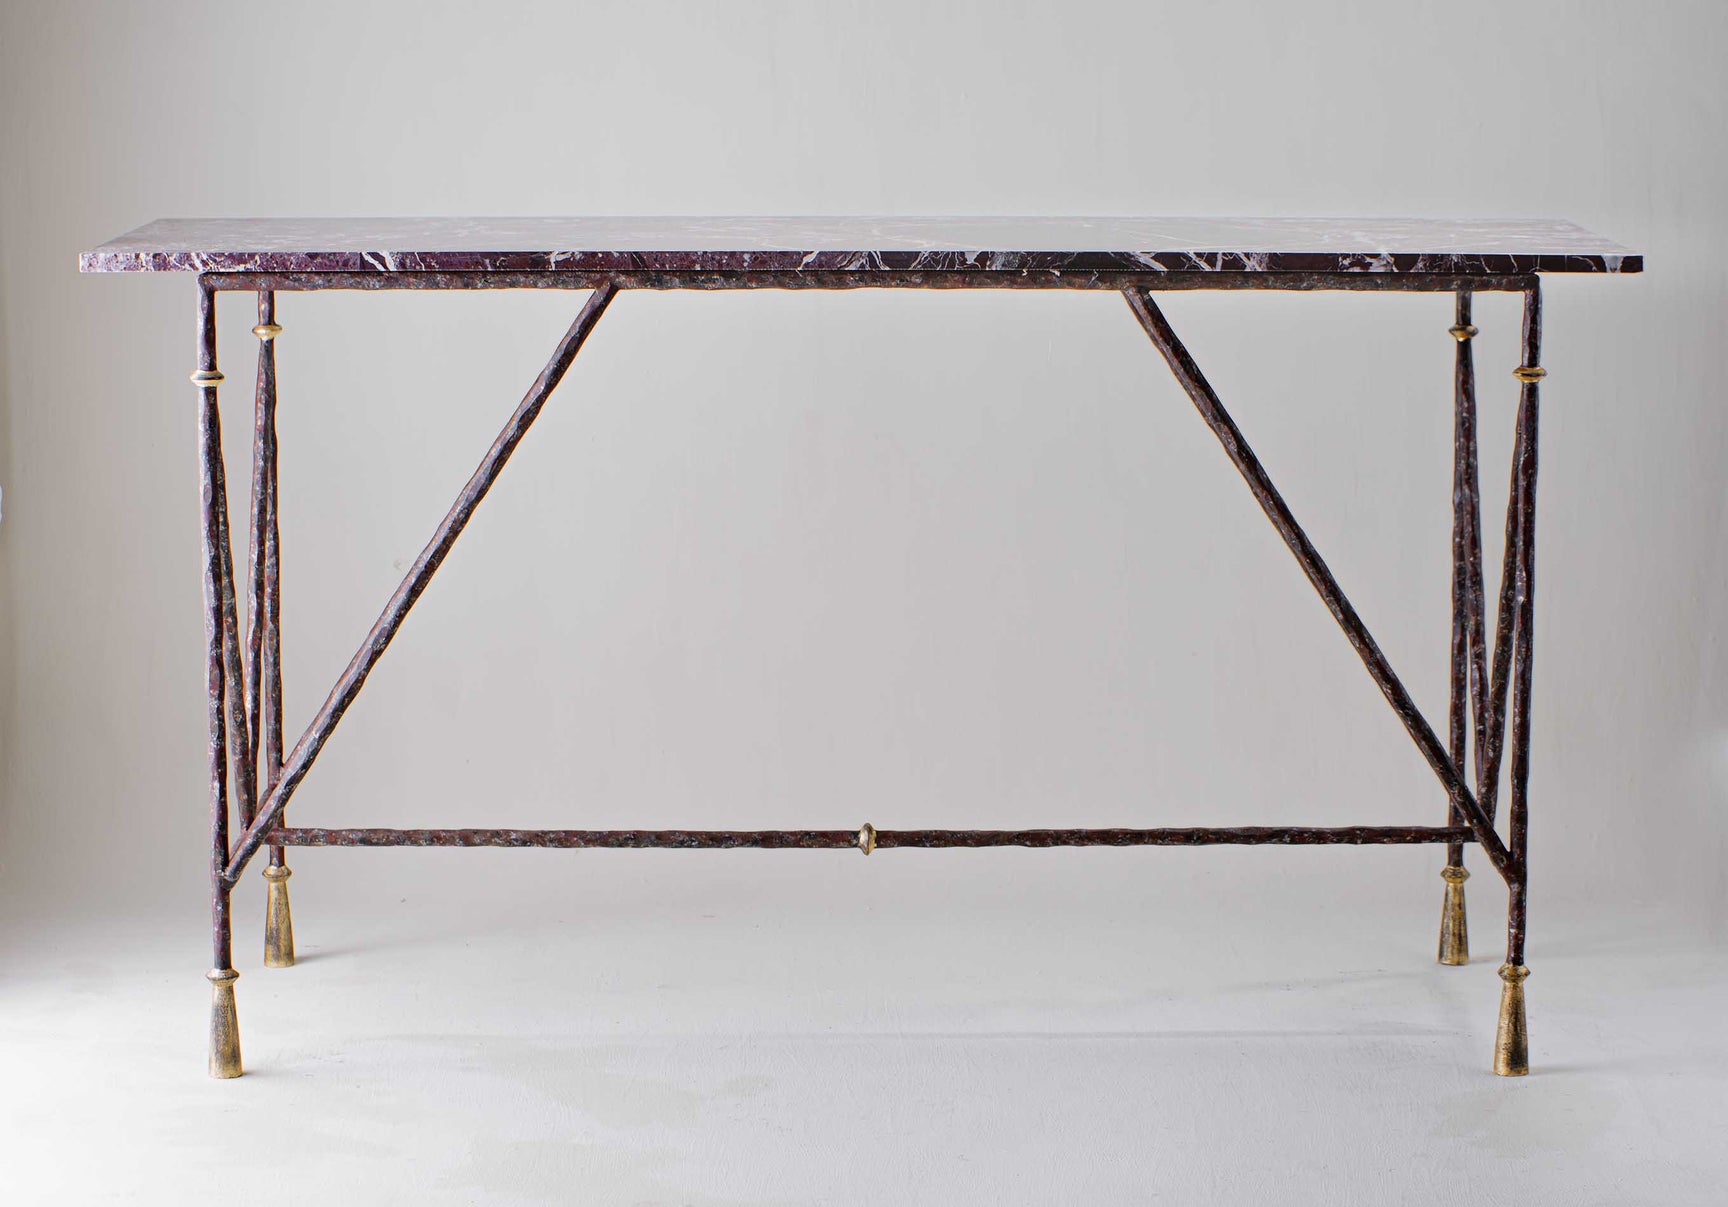 Stanley Console Table